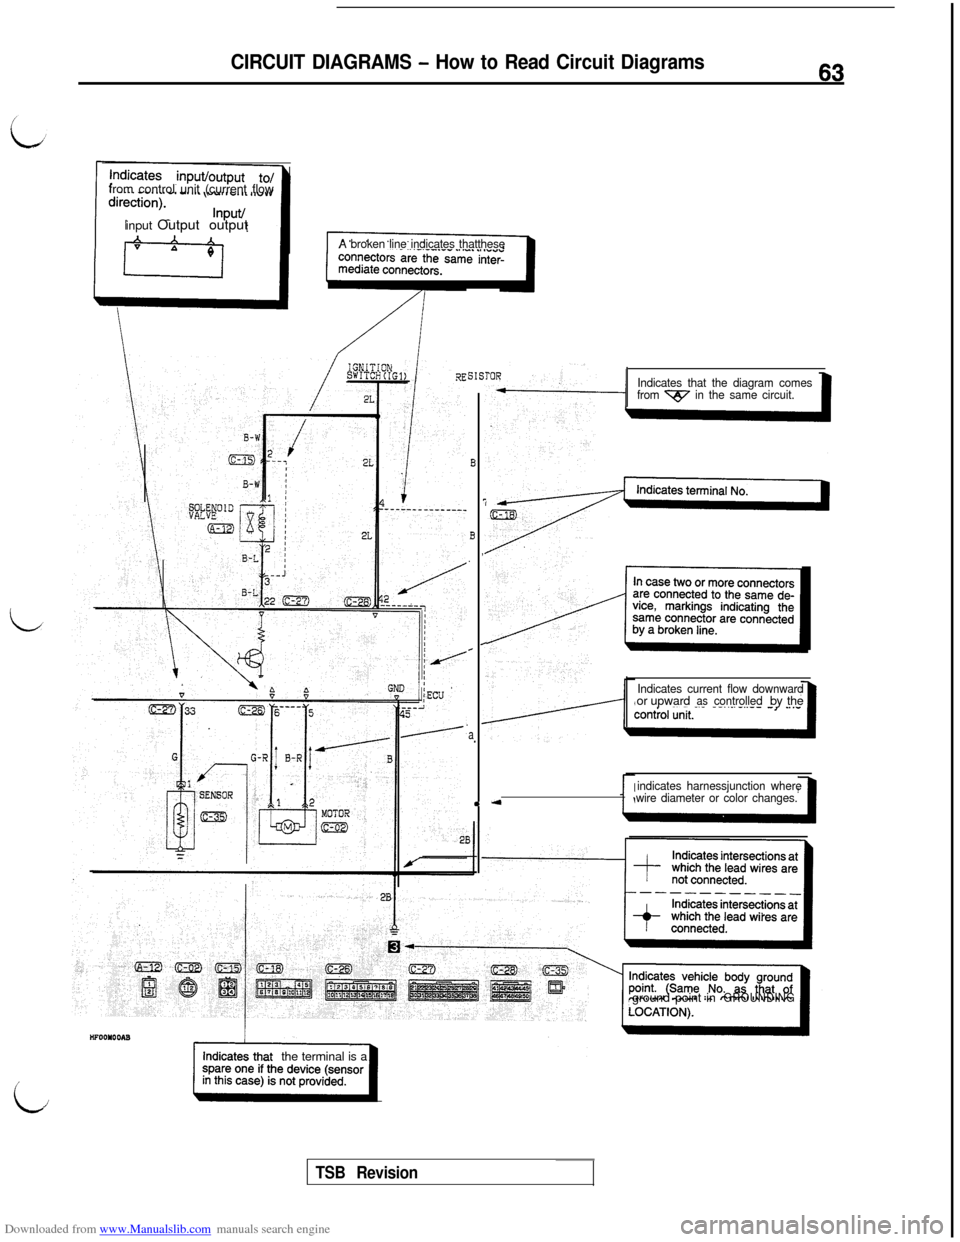 MITSUBISHI 3000GT 1996 2.G Repair Manual Downloaded from www.Manualslib.com manuals search engine CIRCUIT DIAGRAMS - How to Read Circuit Diagrams63from control unit (current flow
input Output output
A broken line indicates thatthese
B
i
B,
.